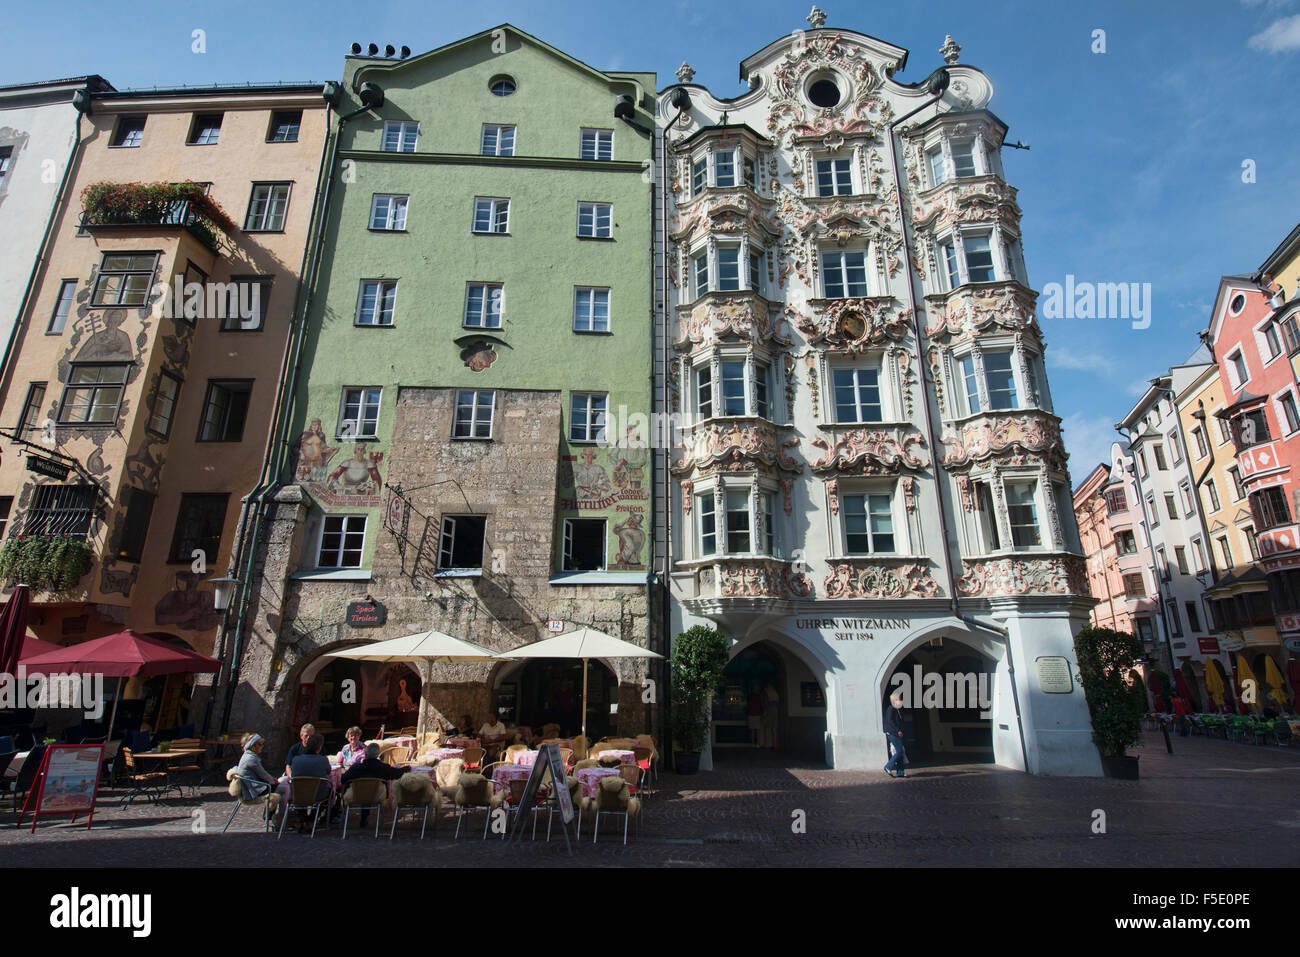 The beautiful Helblinghaus (Casa Helbling), a Baroque and Gothic building in the Old Town of Innsbruck, Austria Stock Photo